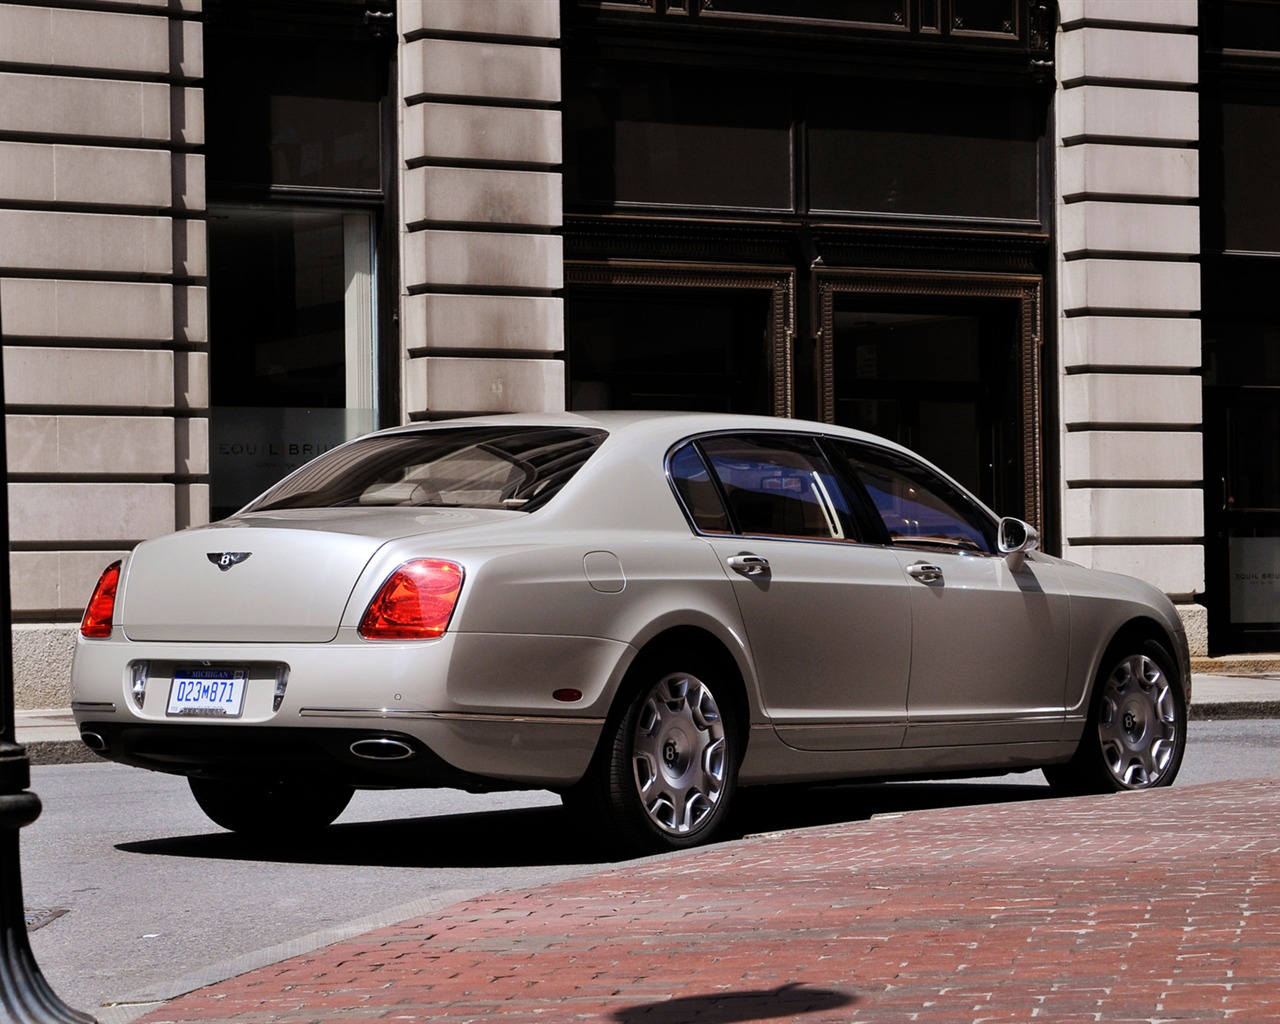 Bentley Continental Flying Spur - 2008 賓利 #9 - 1280x1024